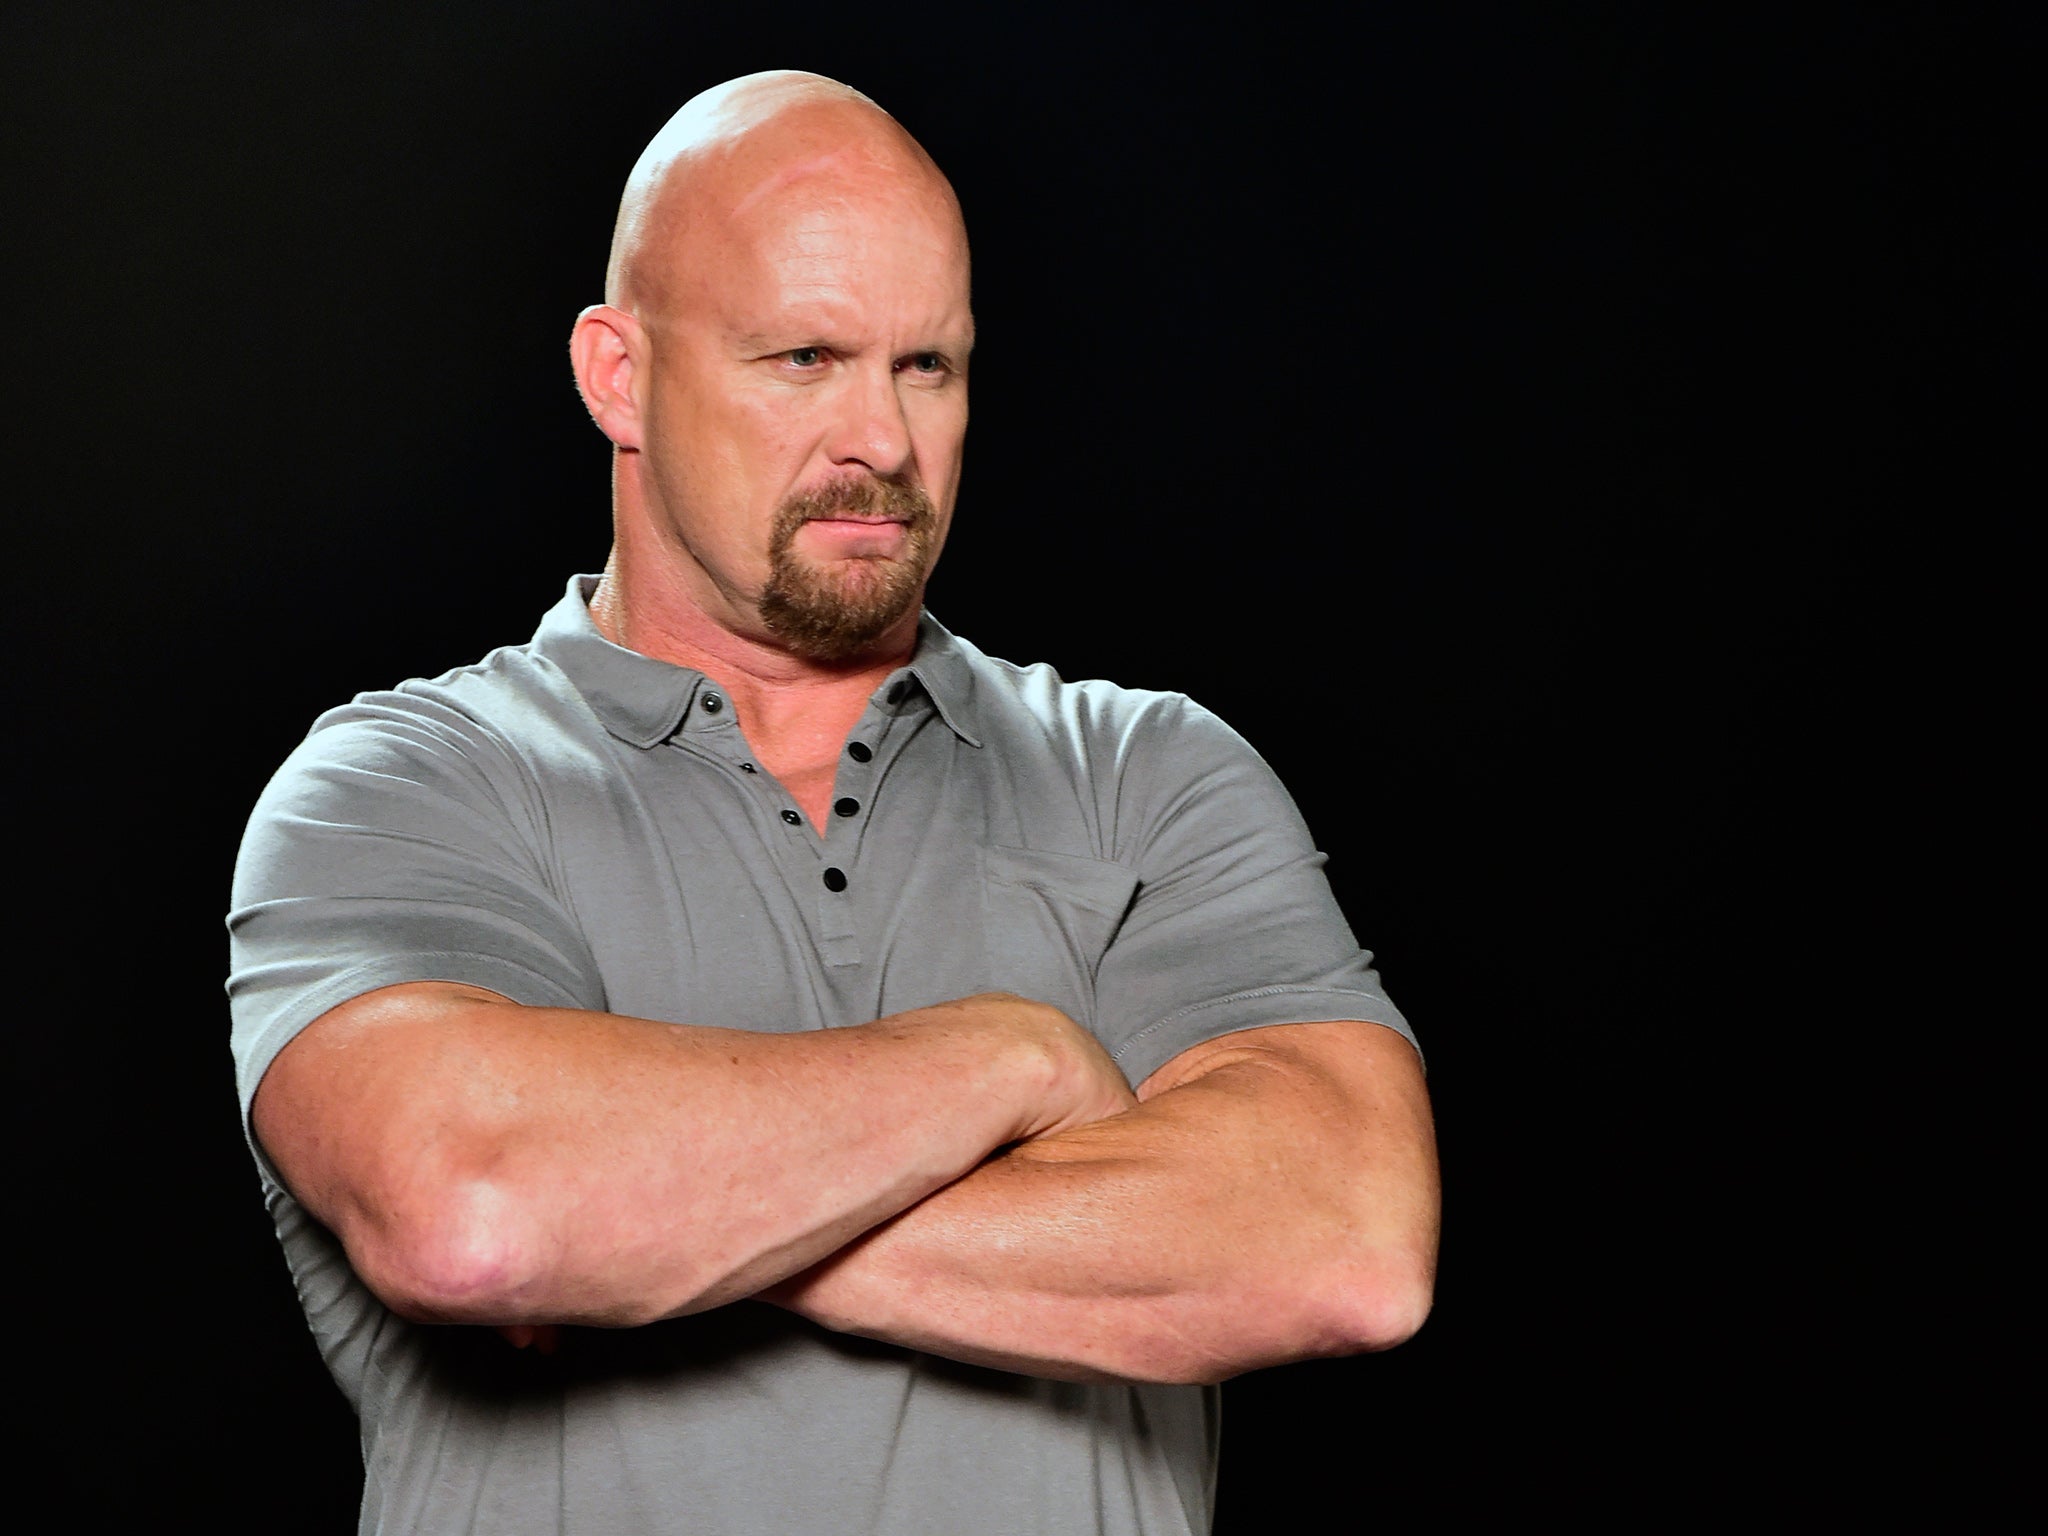 Stone Cold will not be fighting at the next WrestleMania